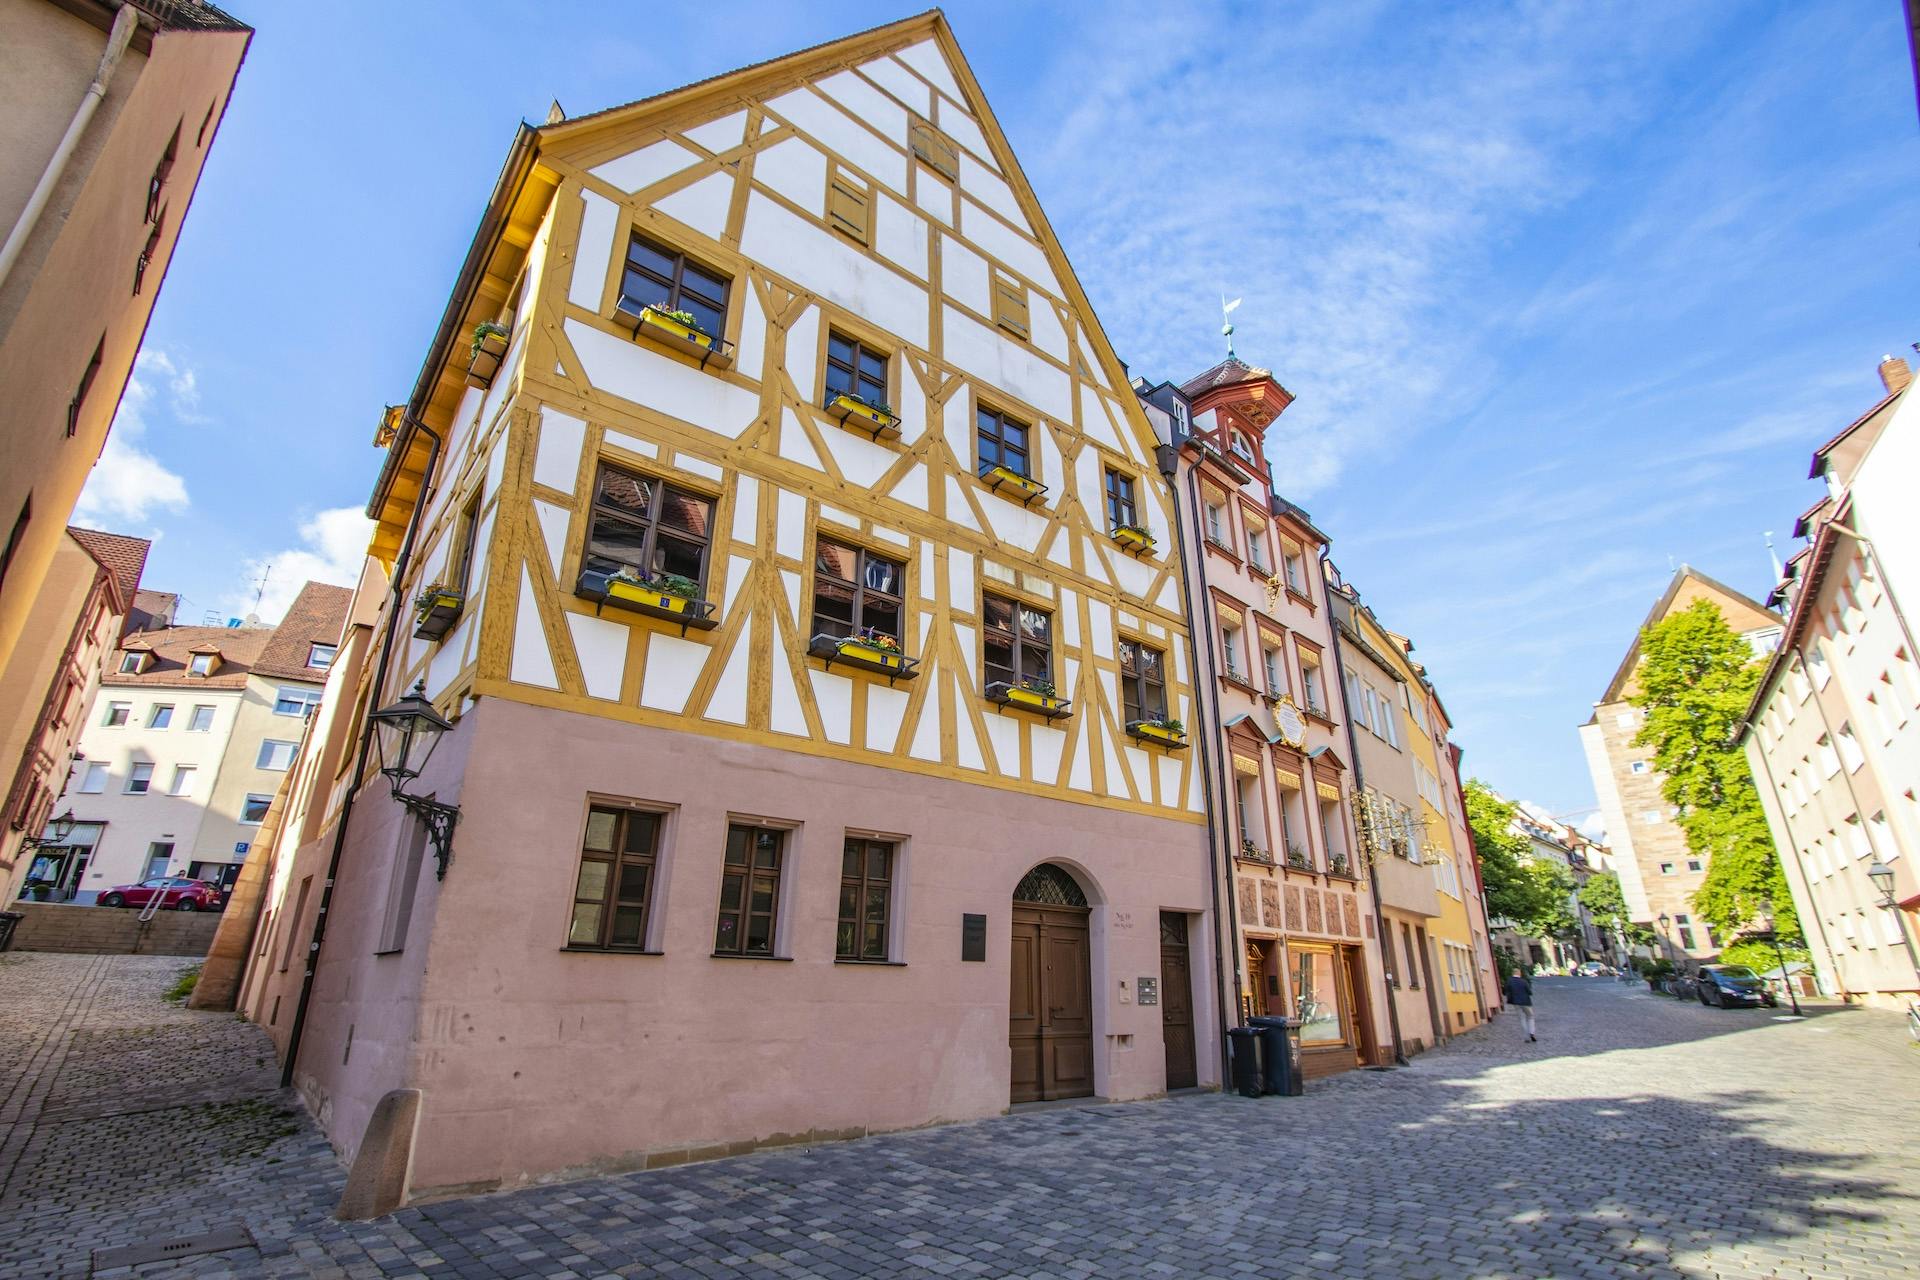 Discover Nuremberg's art and culture with a local